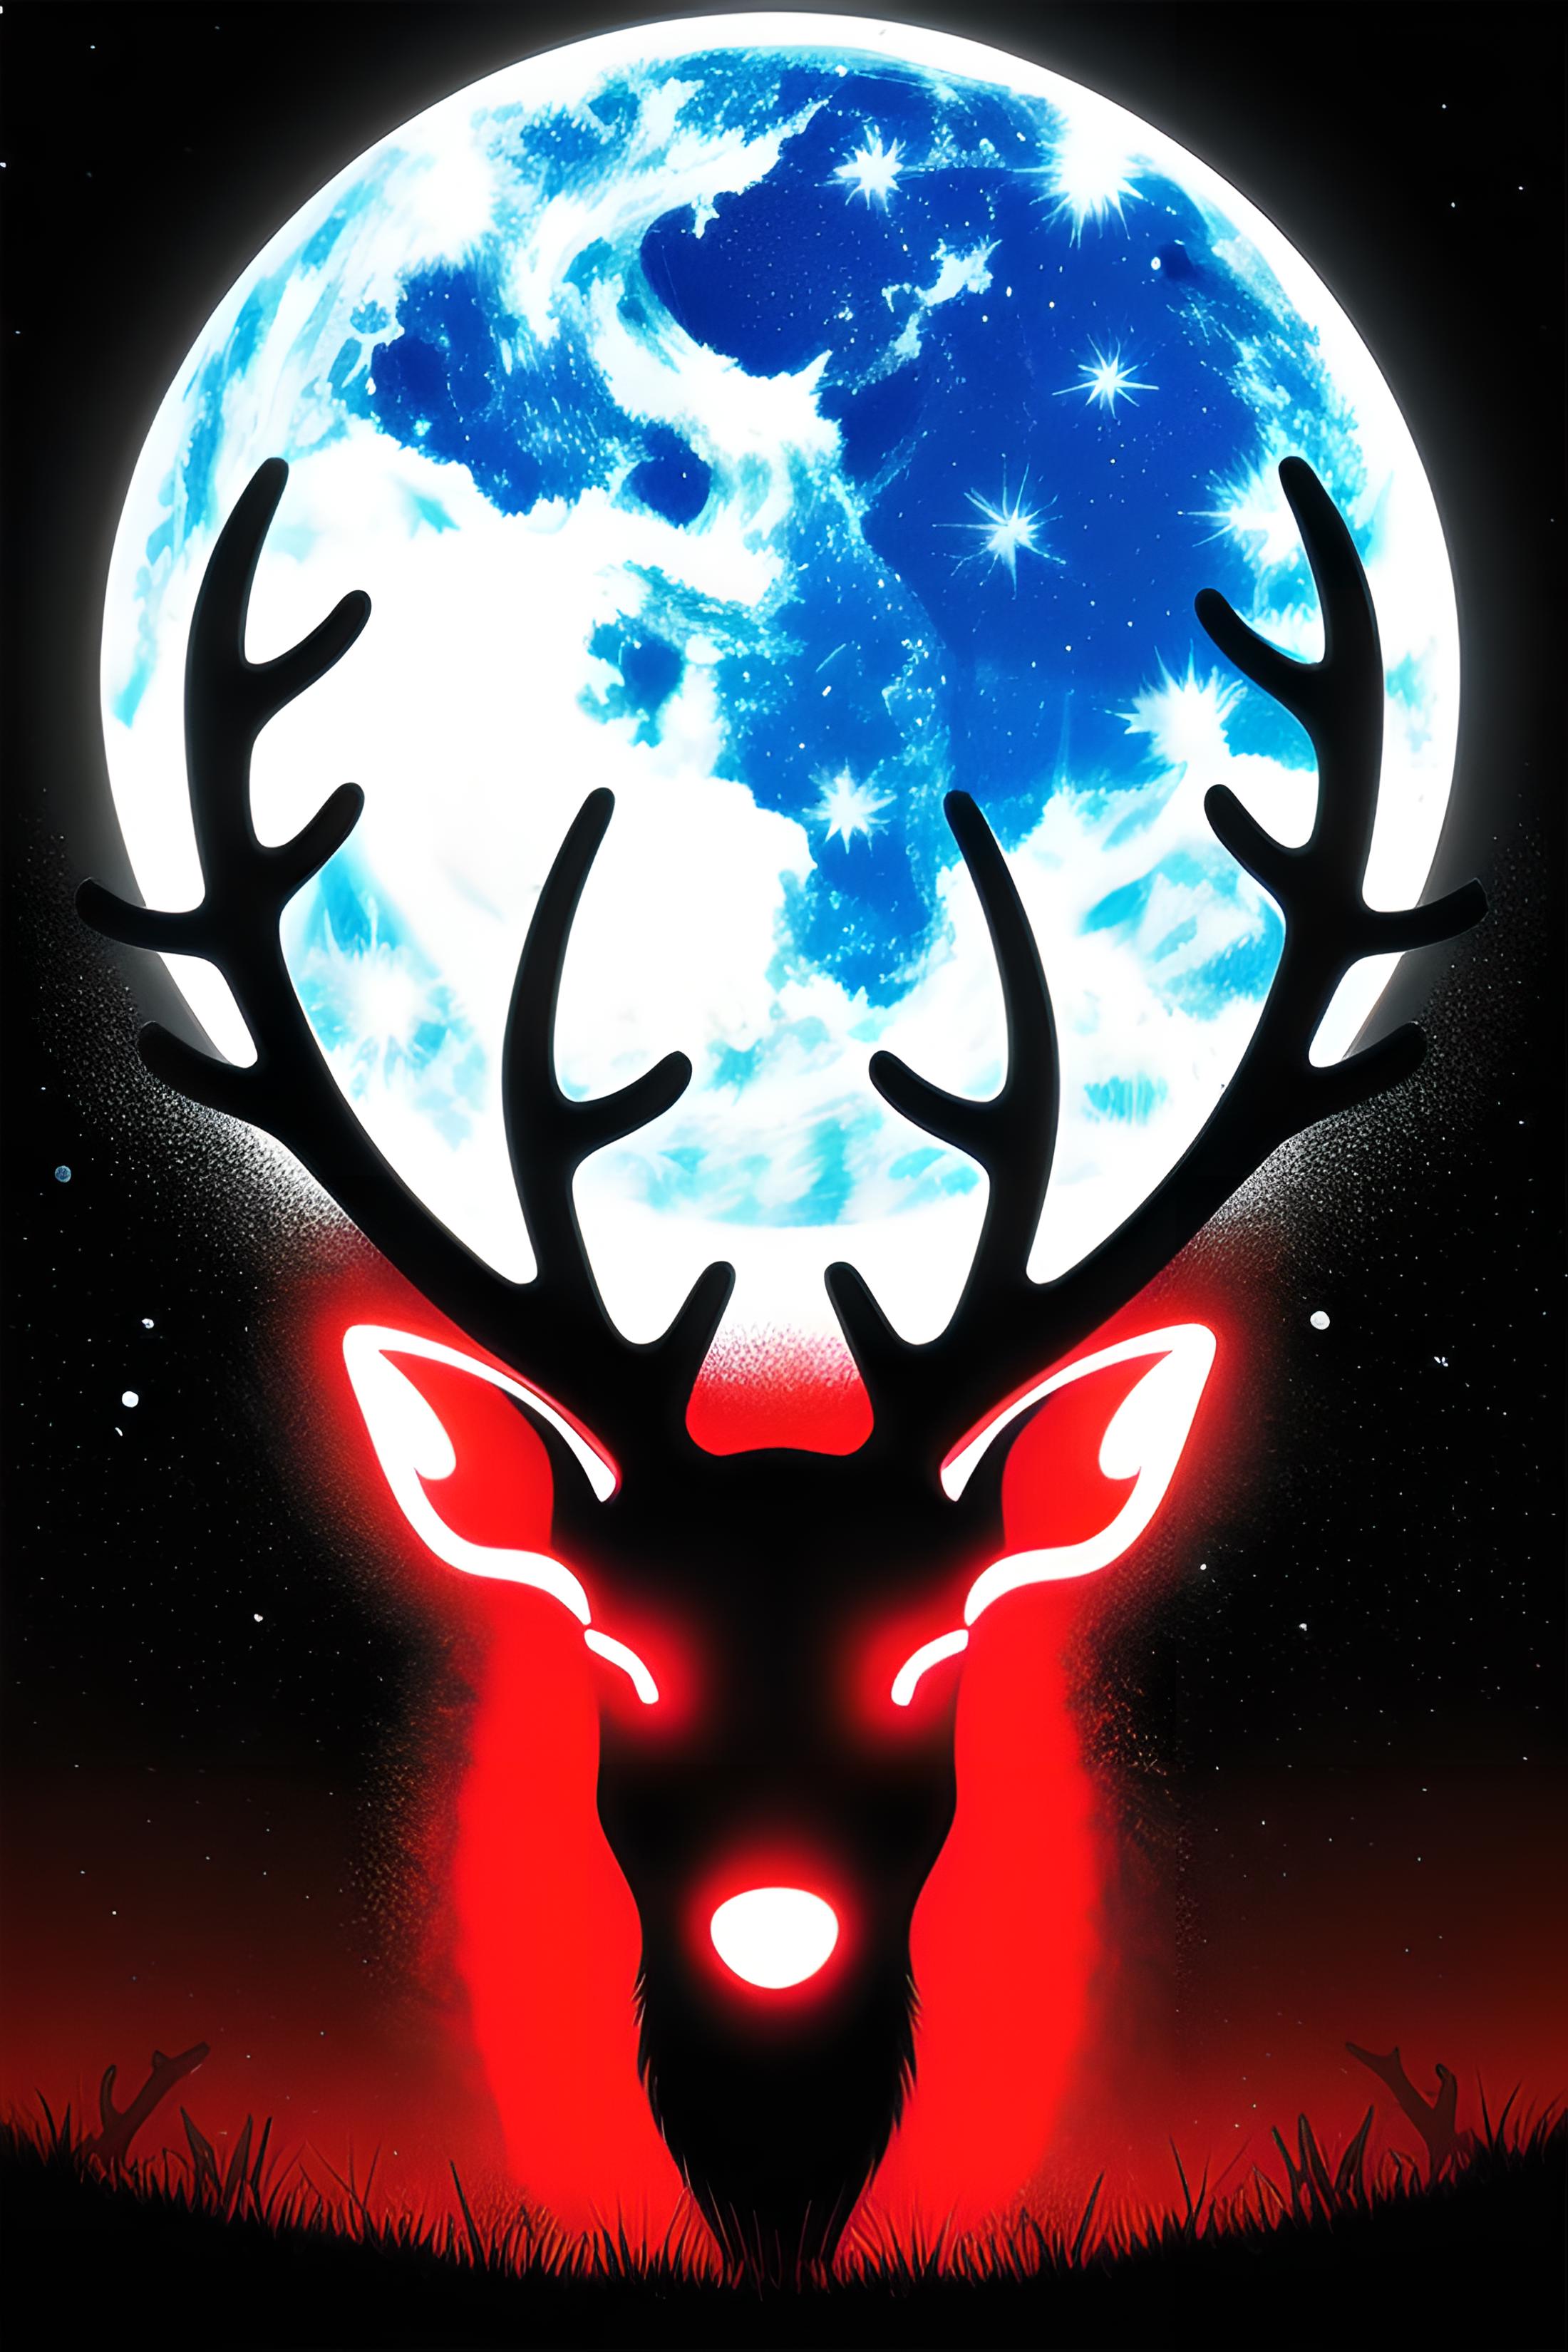 A Deer Staring at the Moon with Stars in the Background